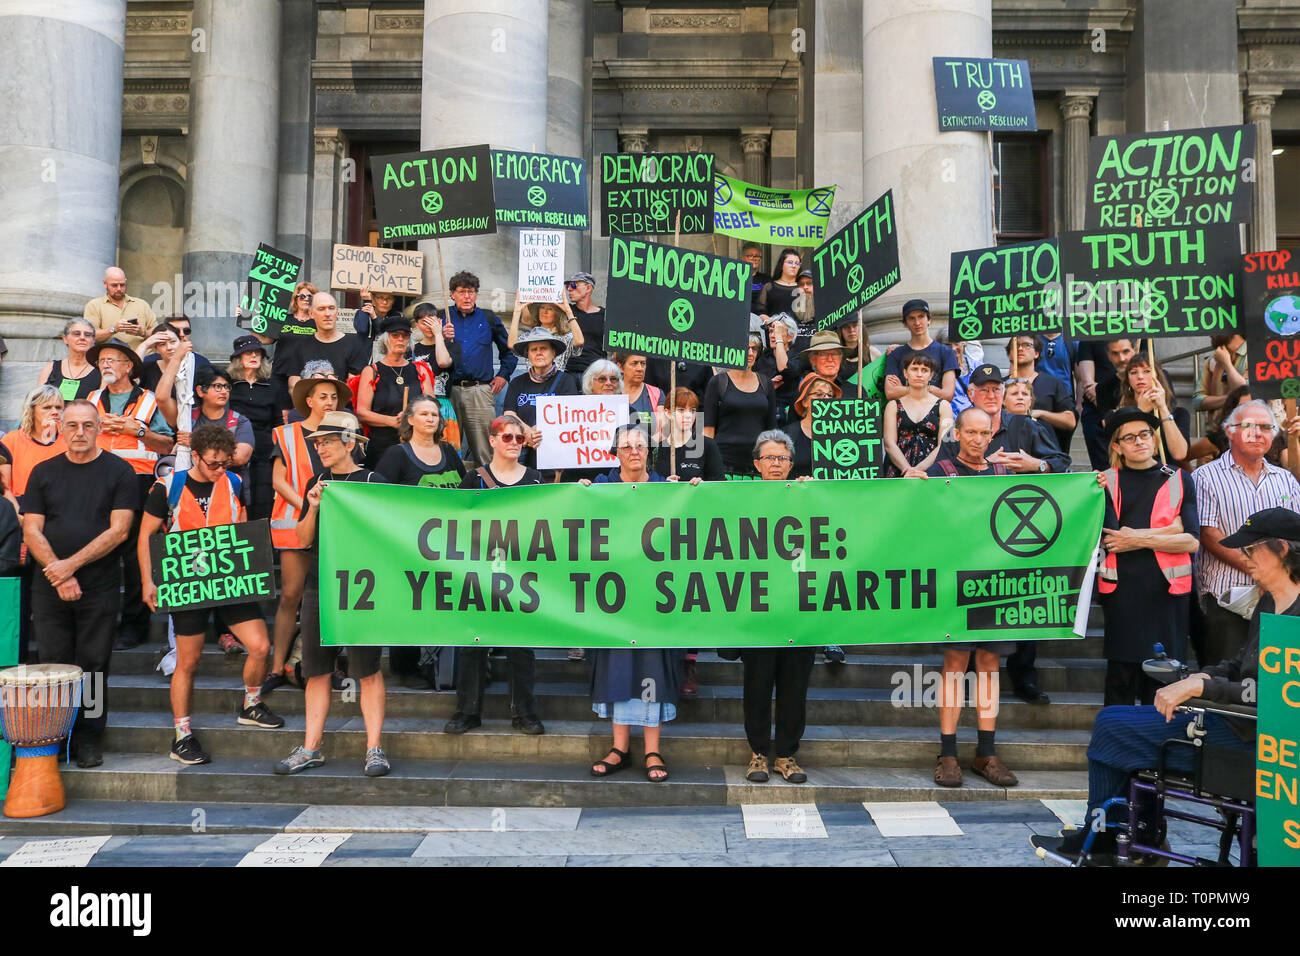 Adelaide Australia. 22nd March 2019. Environmental activists from Extinction Rebellion whose motto is 'Rebel for Life' stage a demonstration outside South Australia Parliament to to call attention to the threats posed to the ecosystem by global warming for the future of the planet to mitigate climate breakdown, halt biodiversity loss, and minimise the risk of human extinction and ecological collapse Credit: amer ghazzal/Alamy Live News Stock Photo